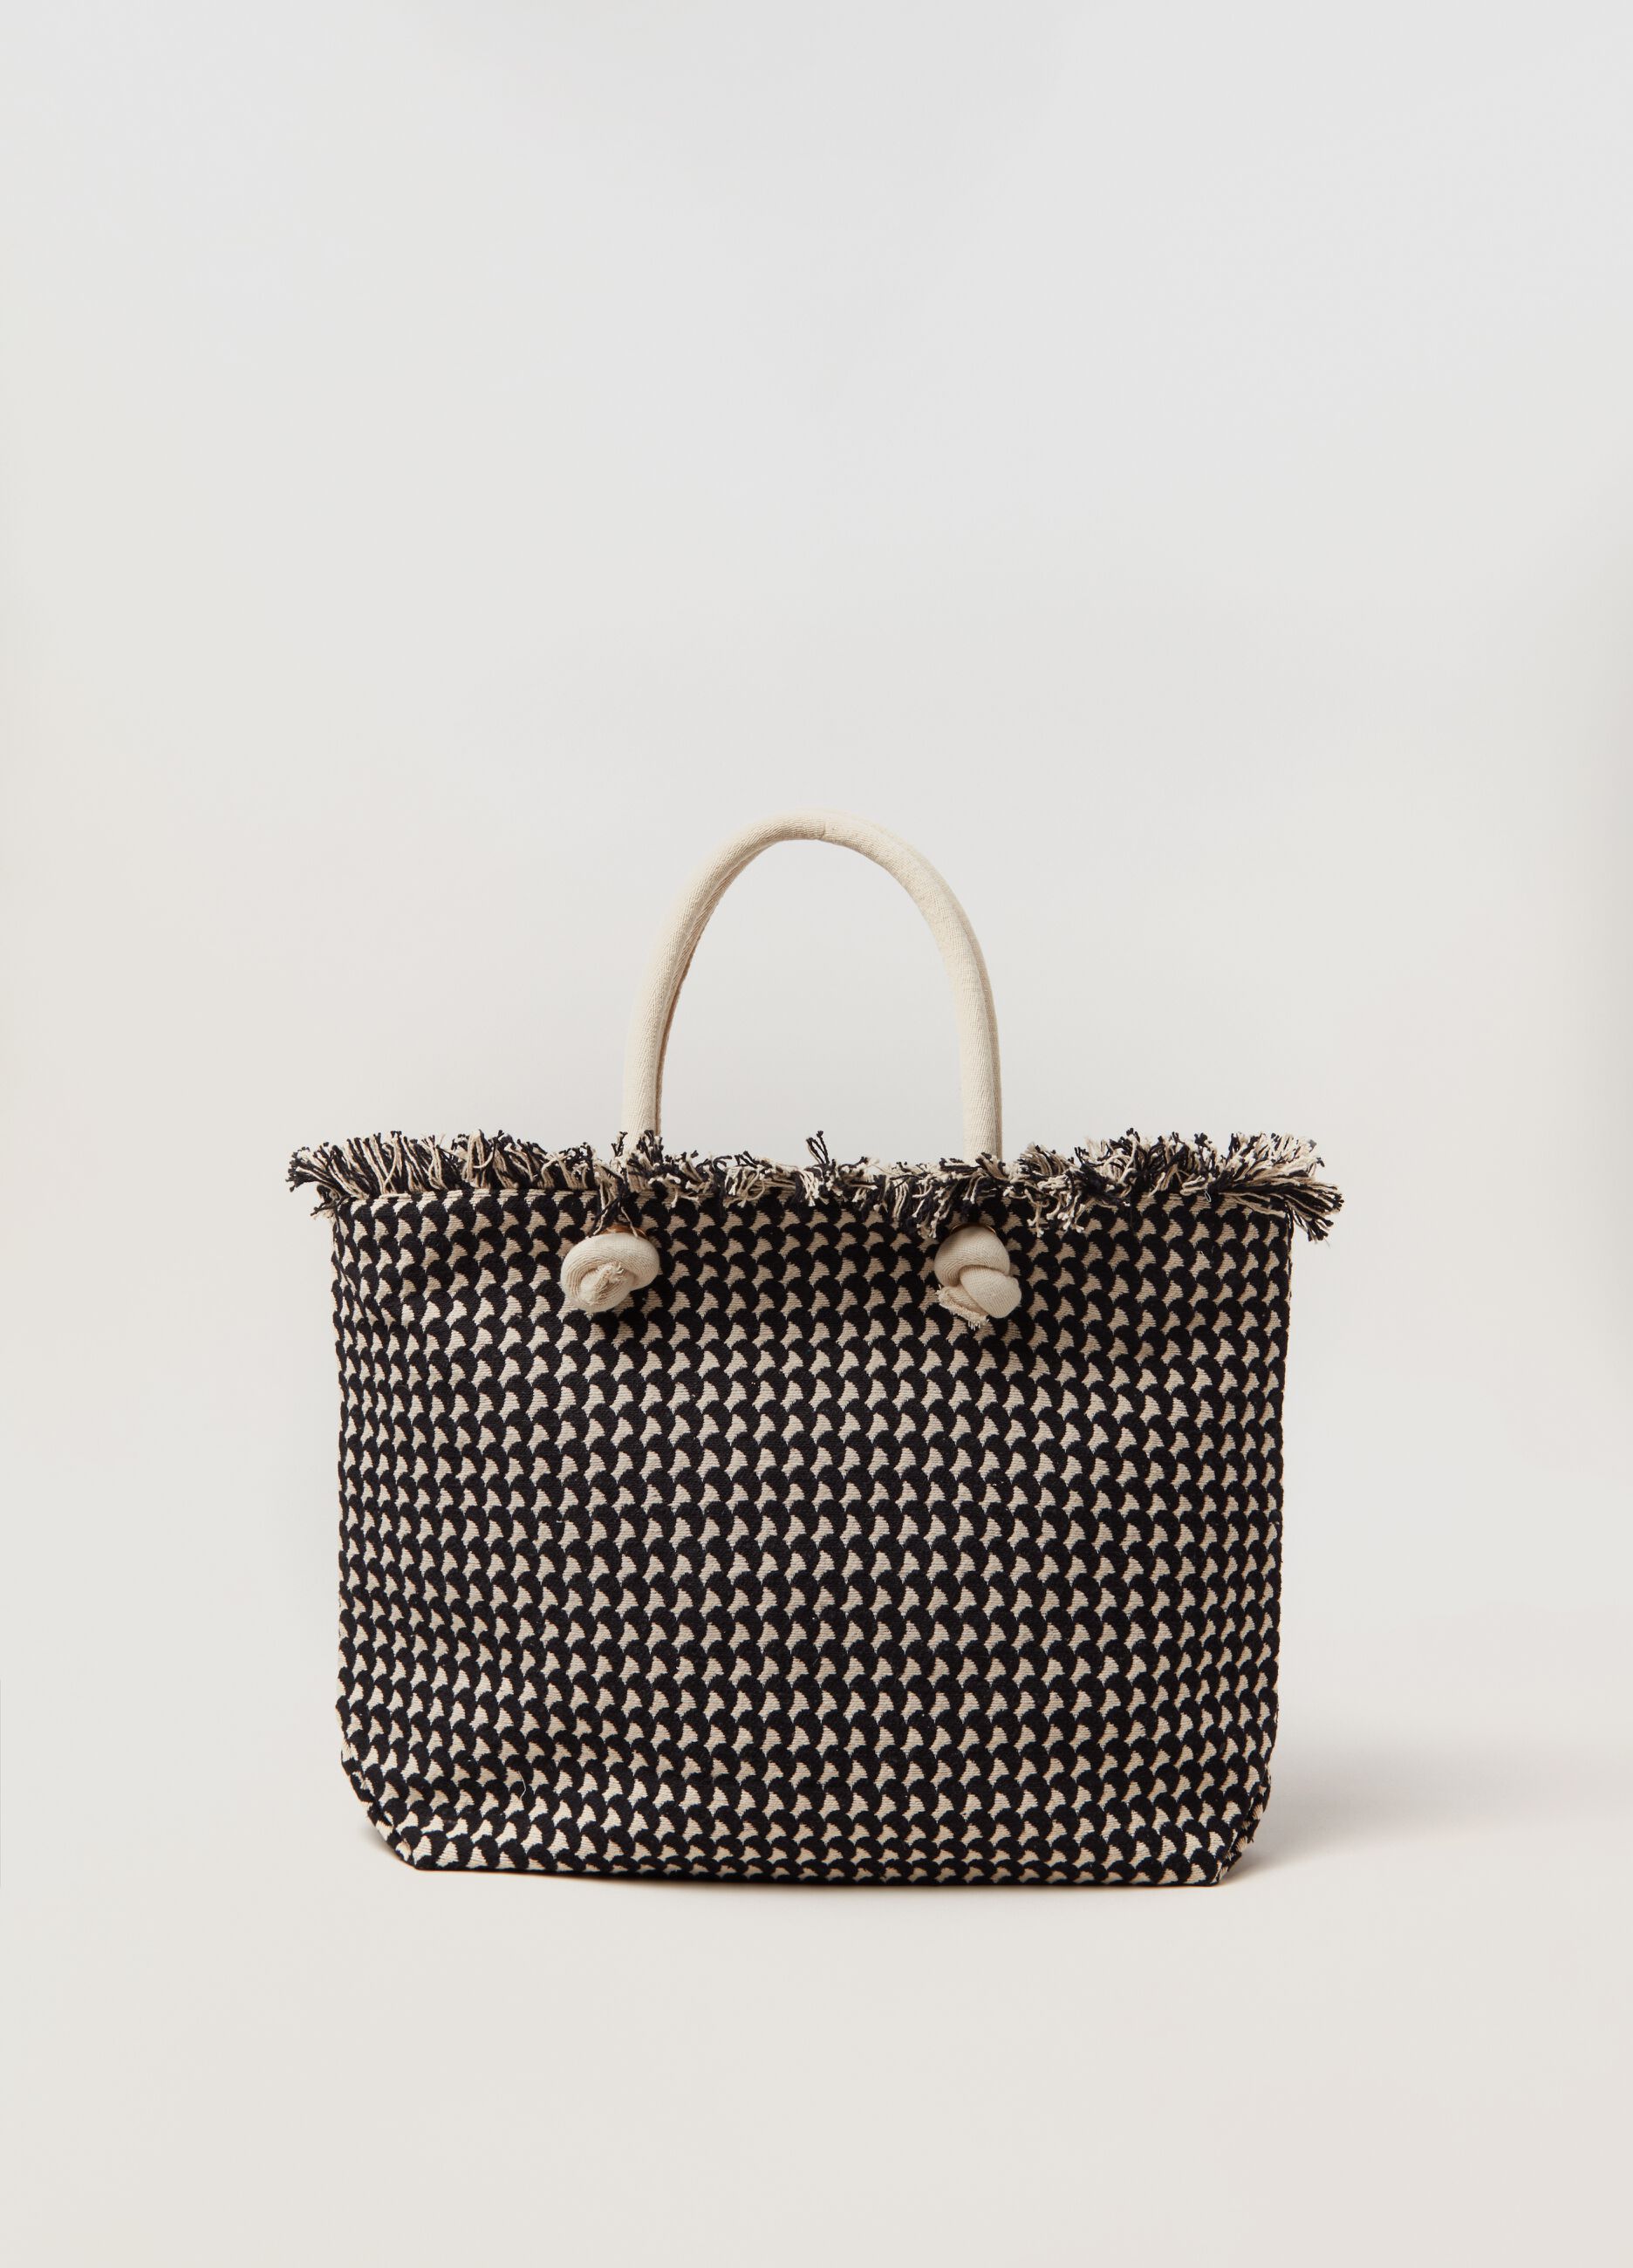 Tote bag with jacquard pattern